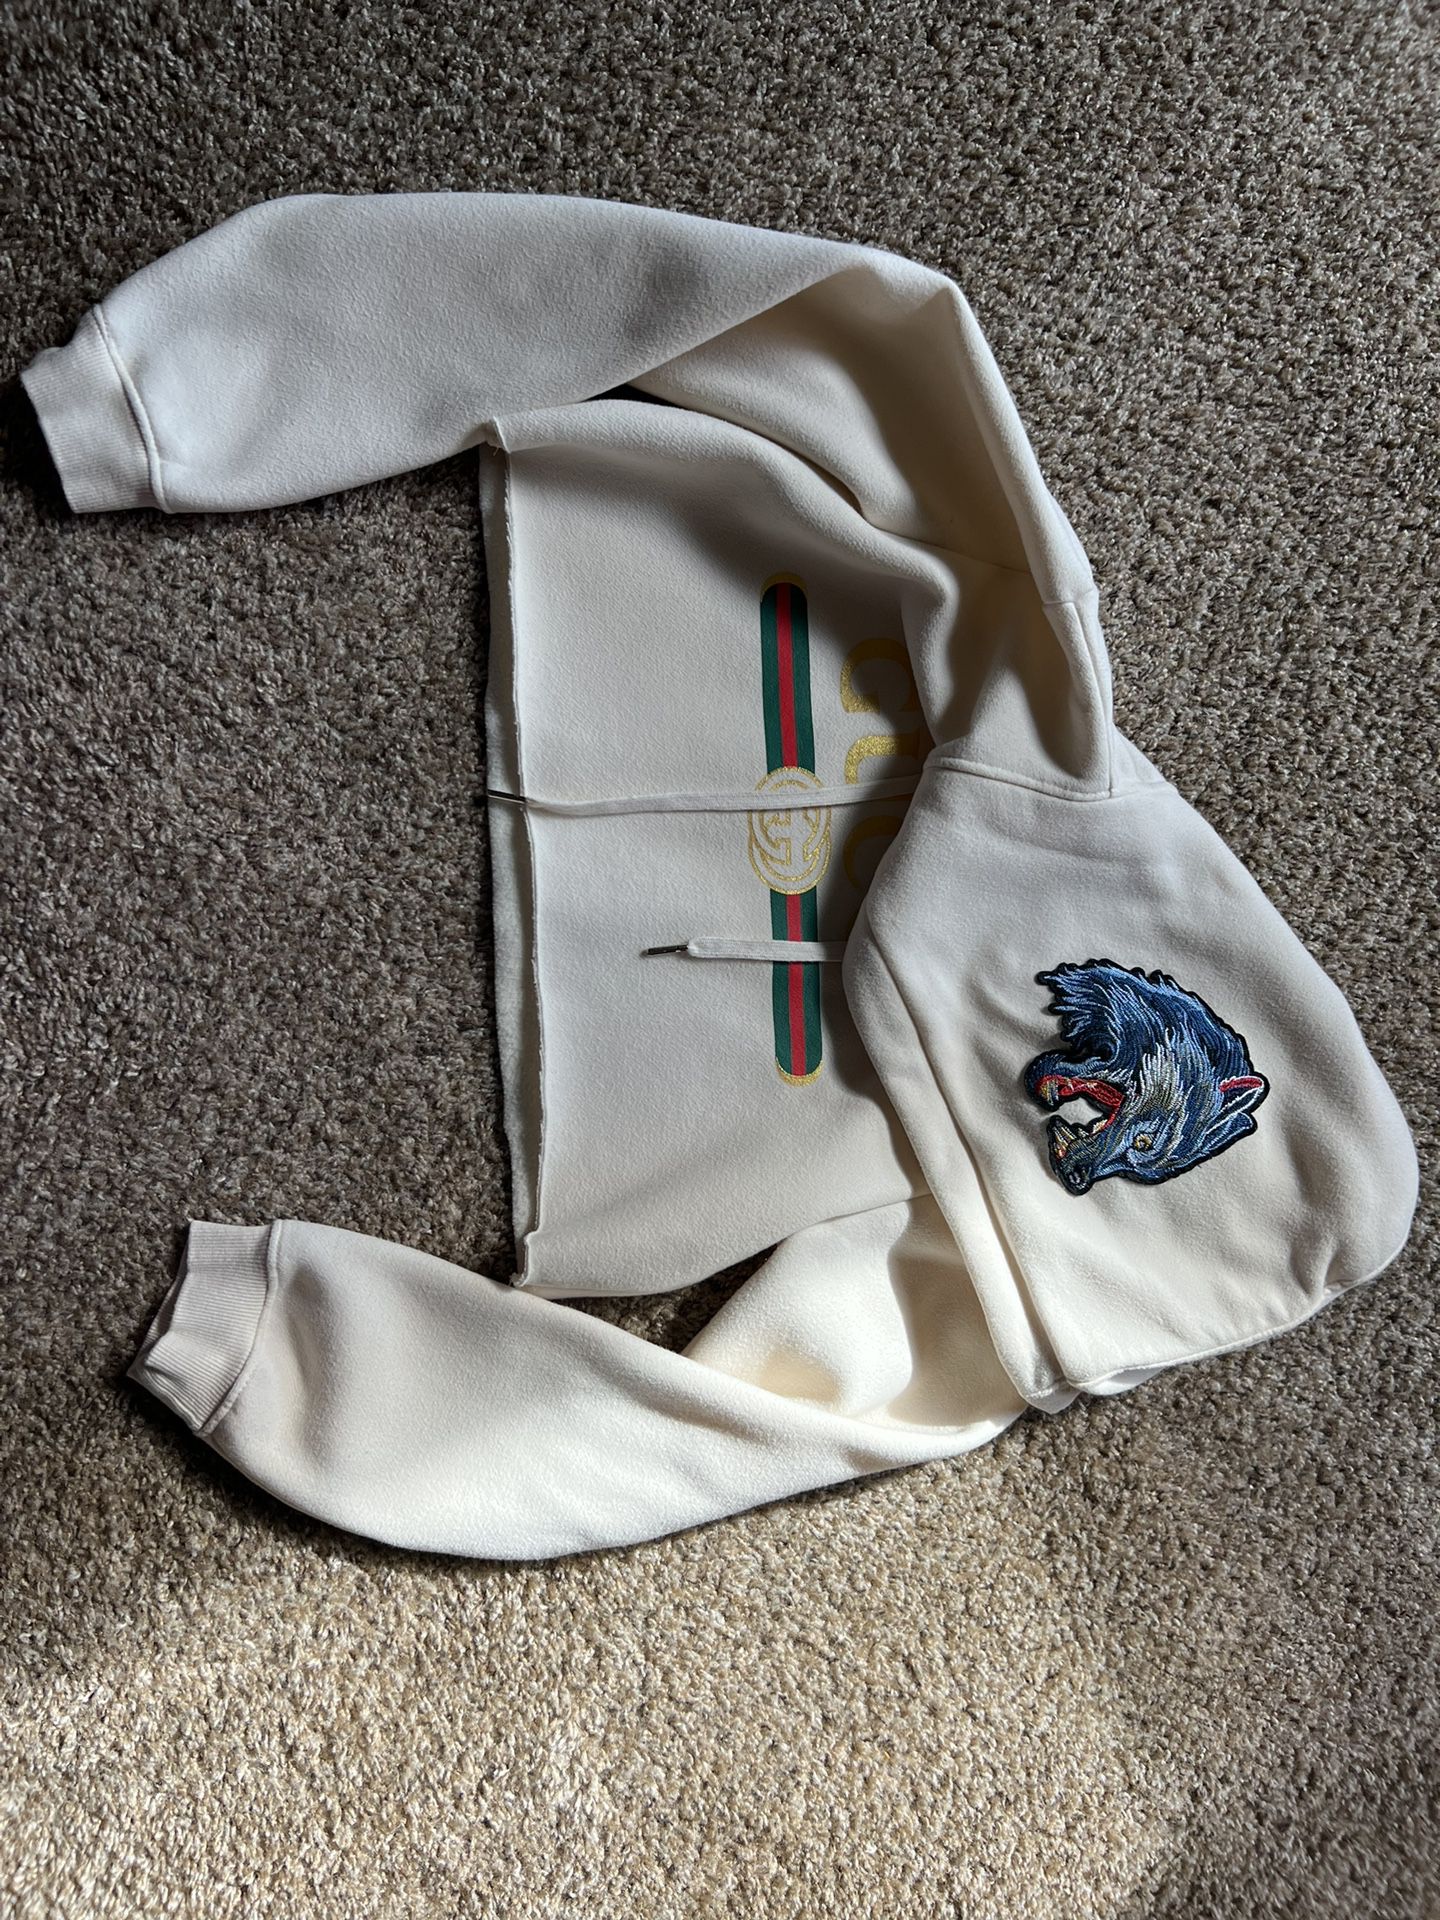 Gucci Top Wolf On Hood ! for Sale in San CA - OfferUp